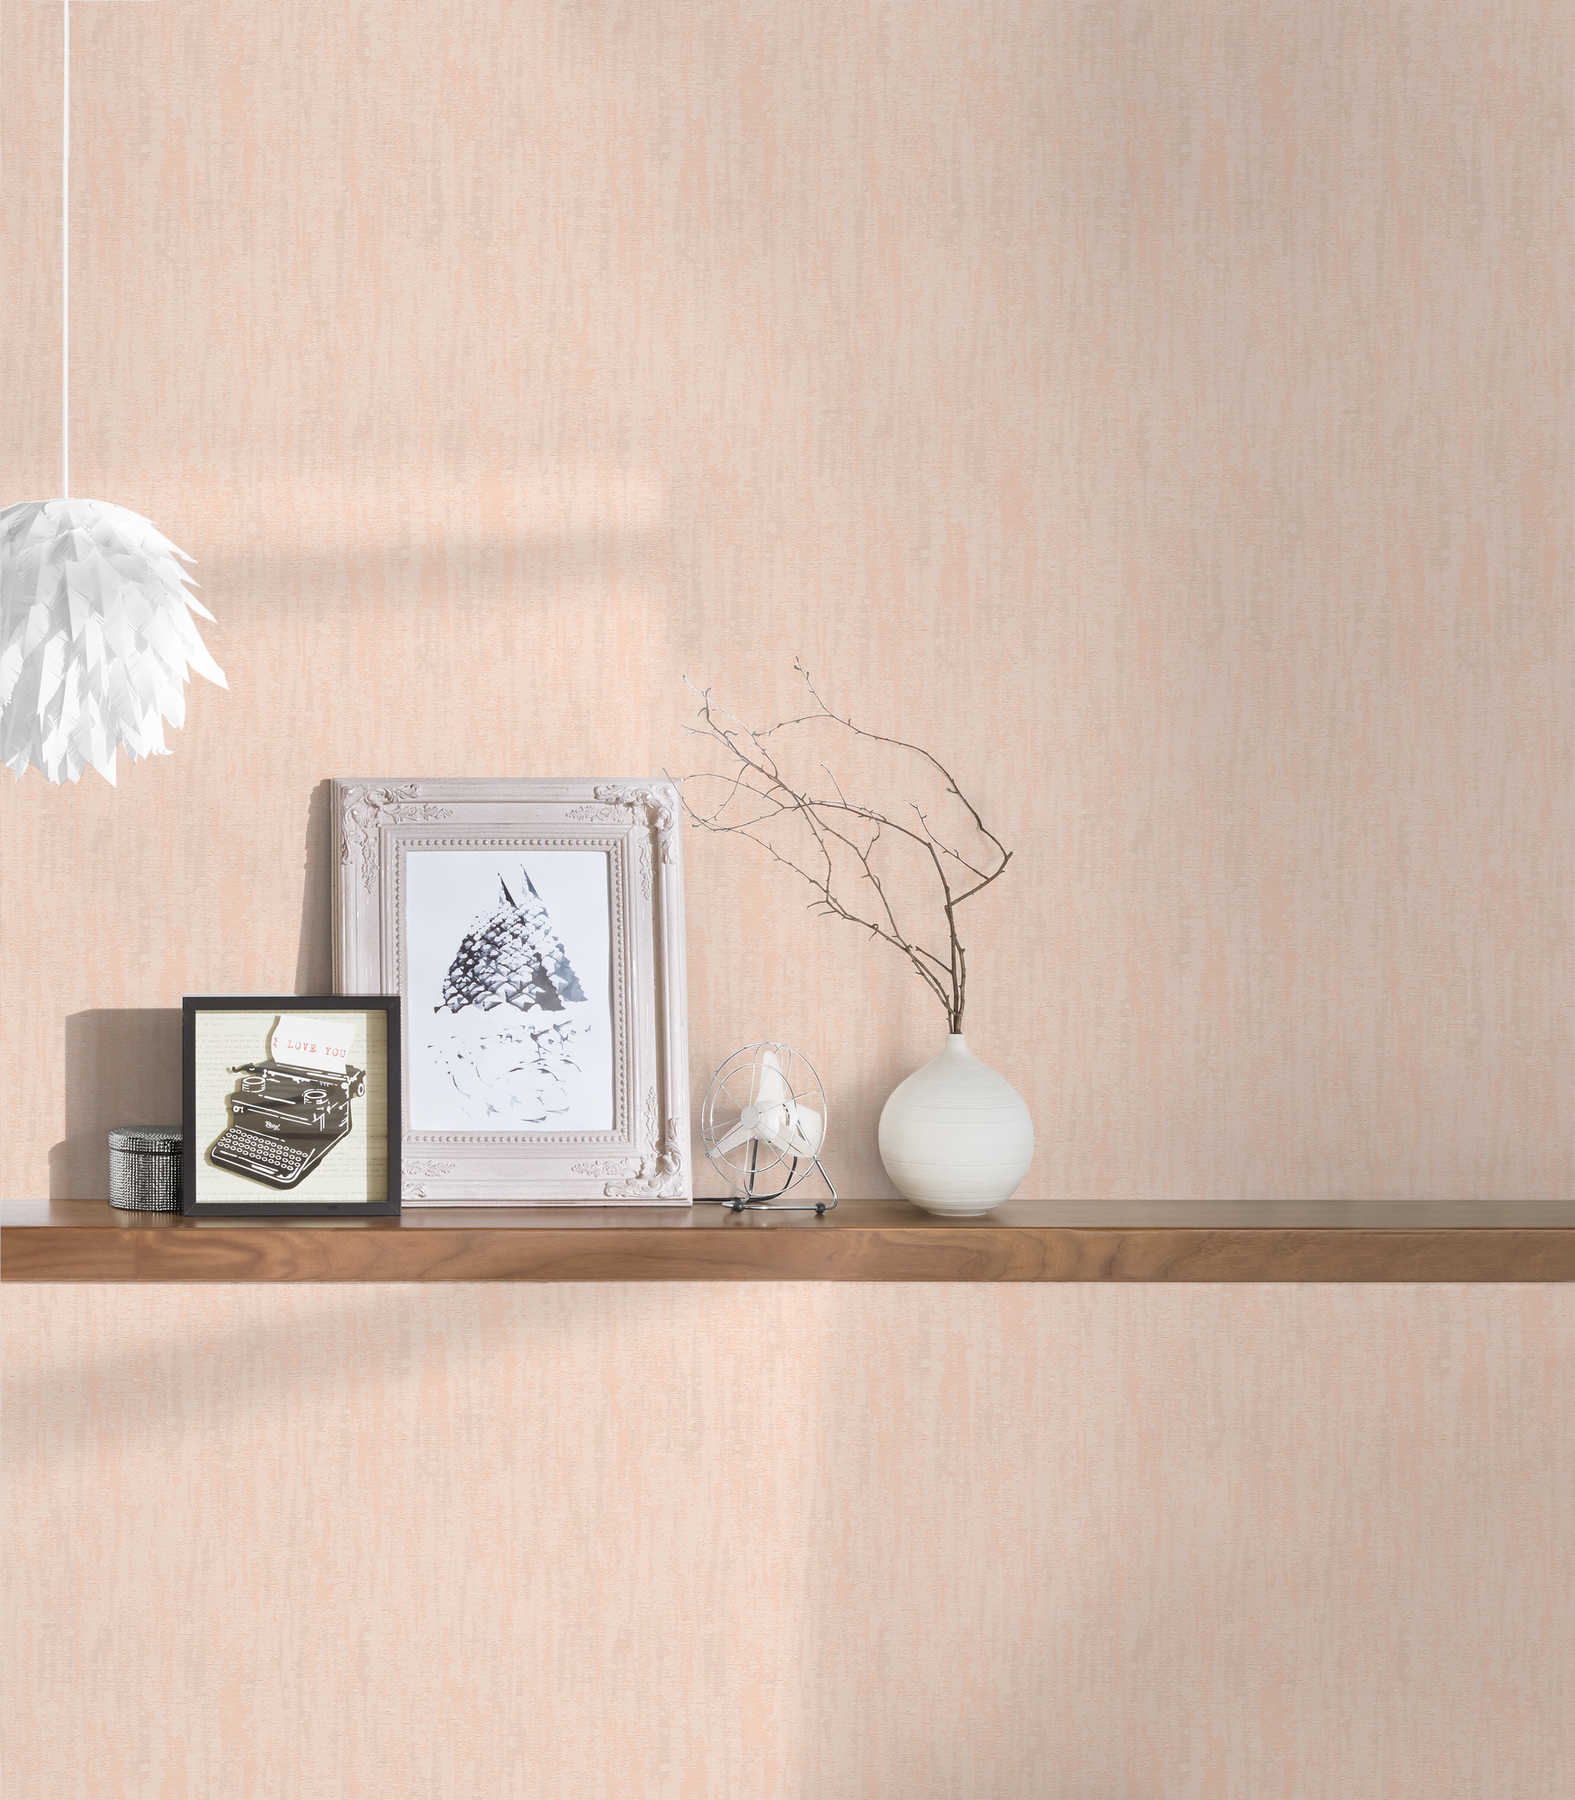             High quality non-woven wallpaper plain with gloss effect - pink
        